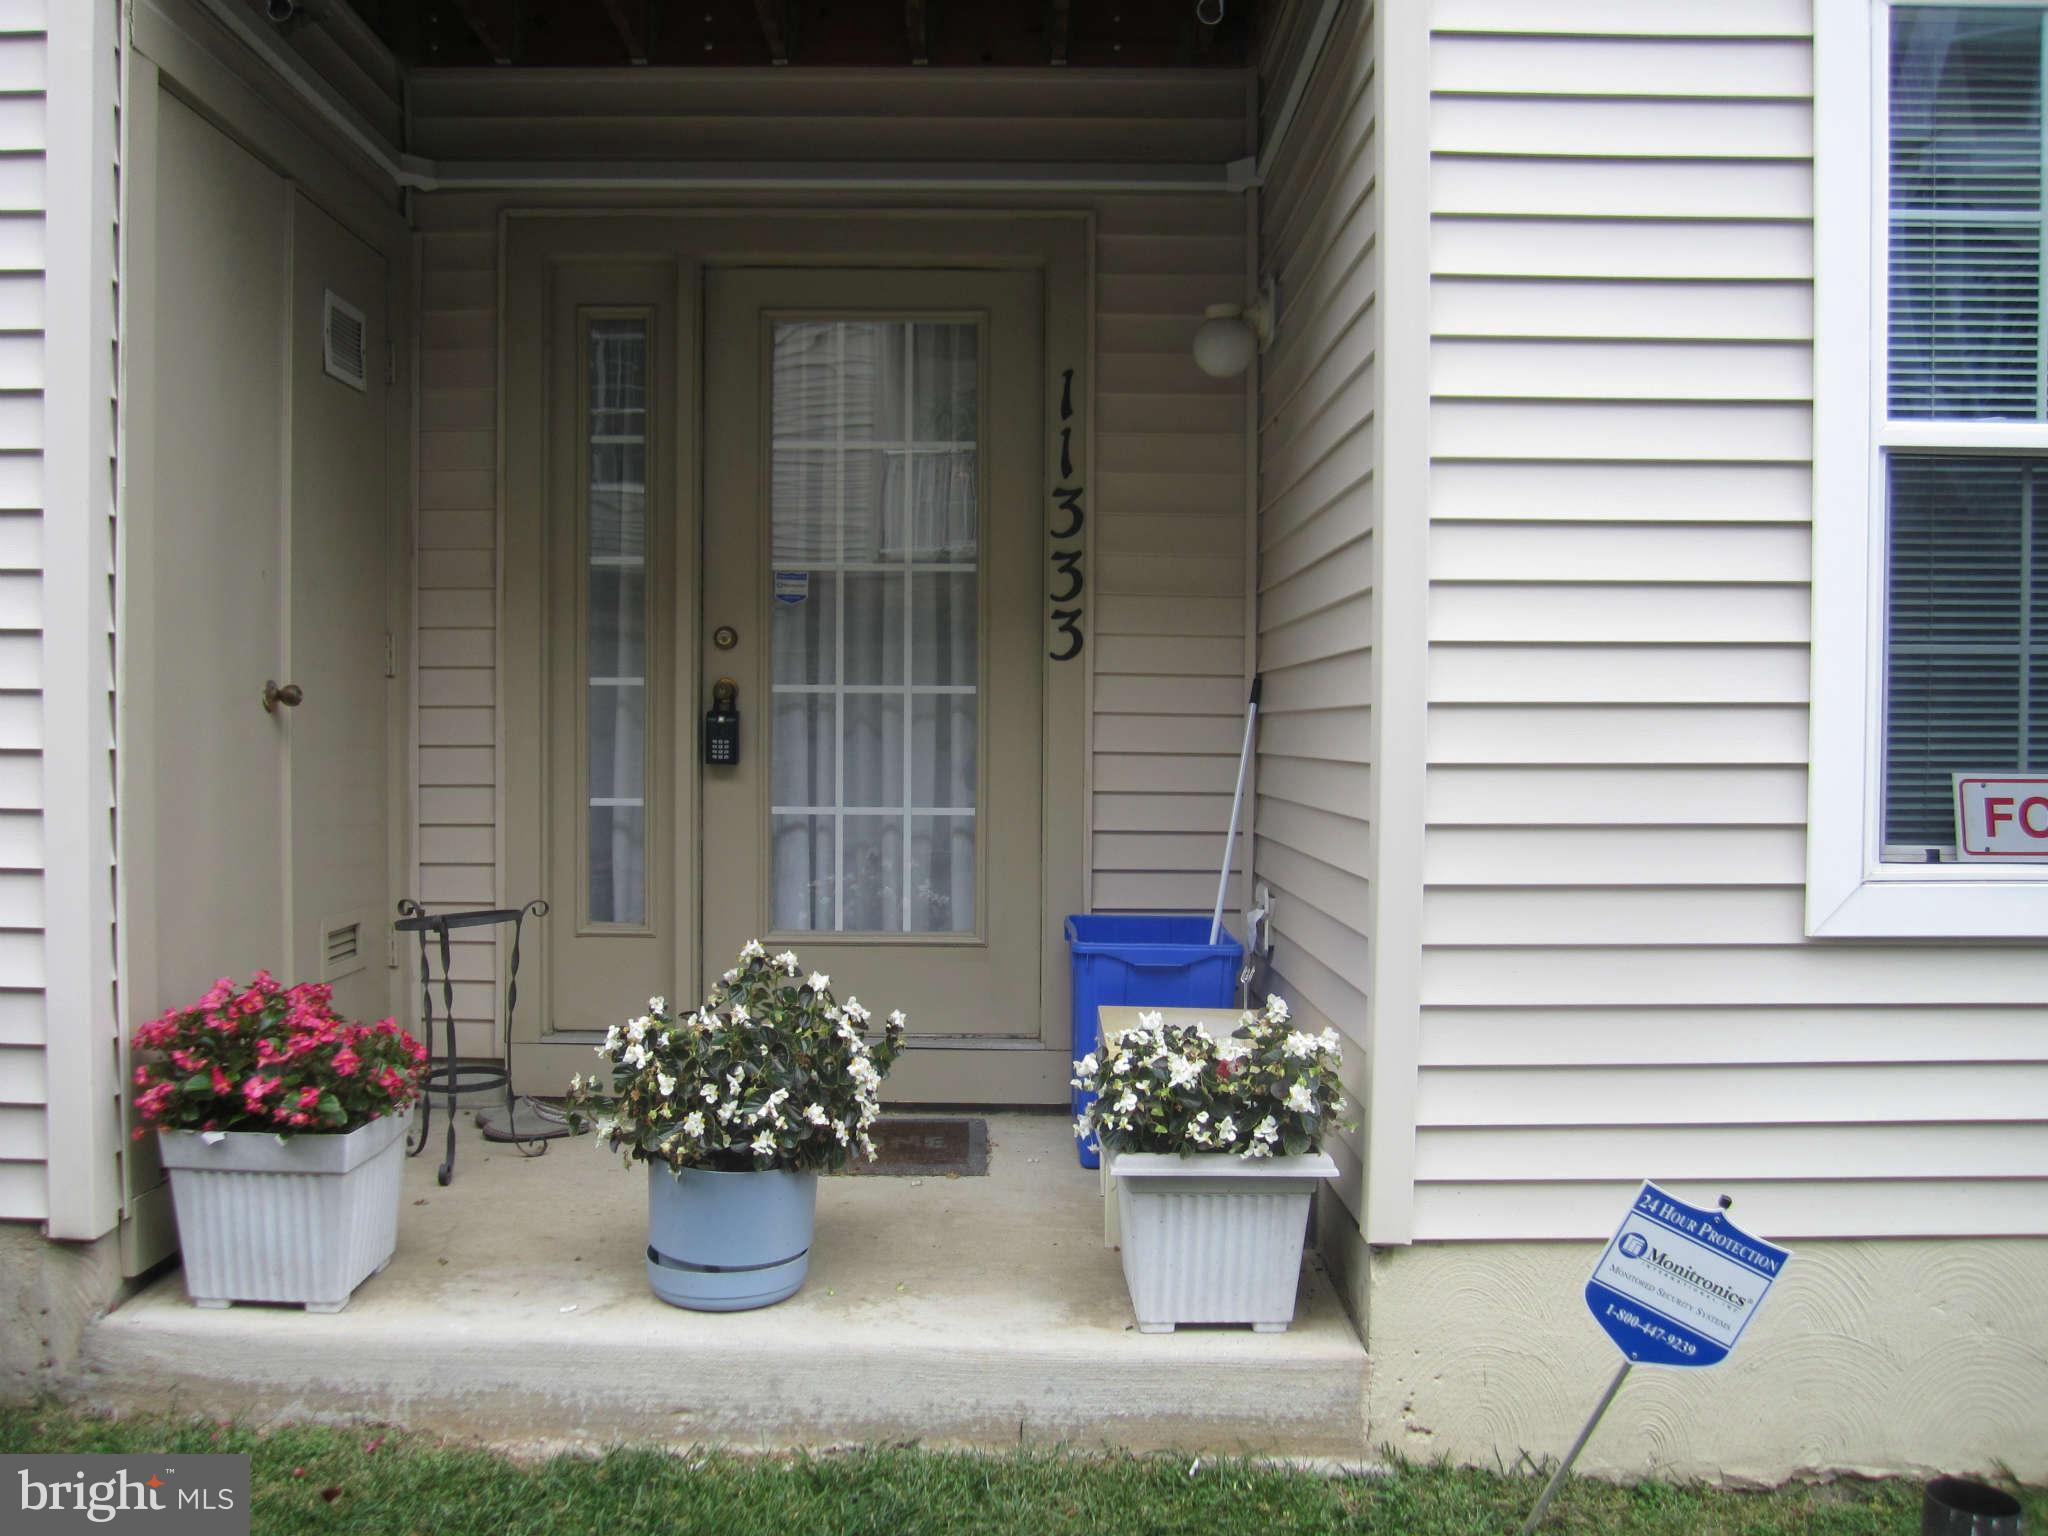 a view of a porch with dining chair